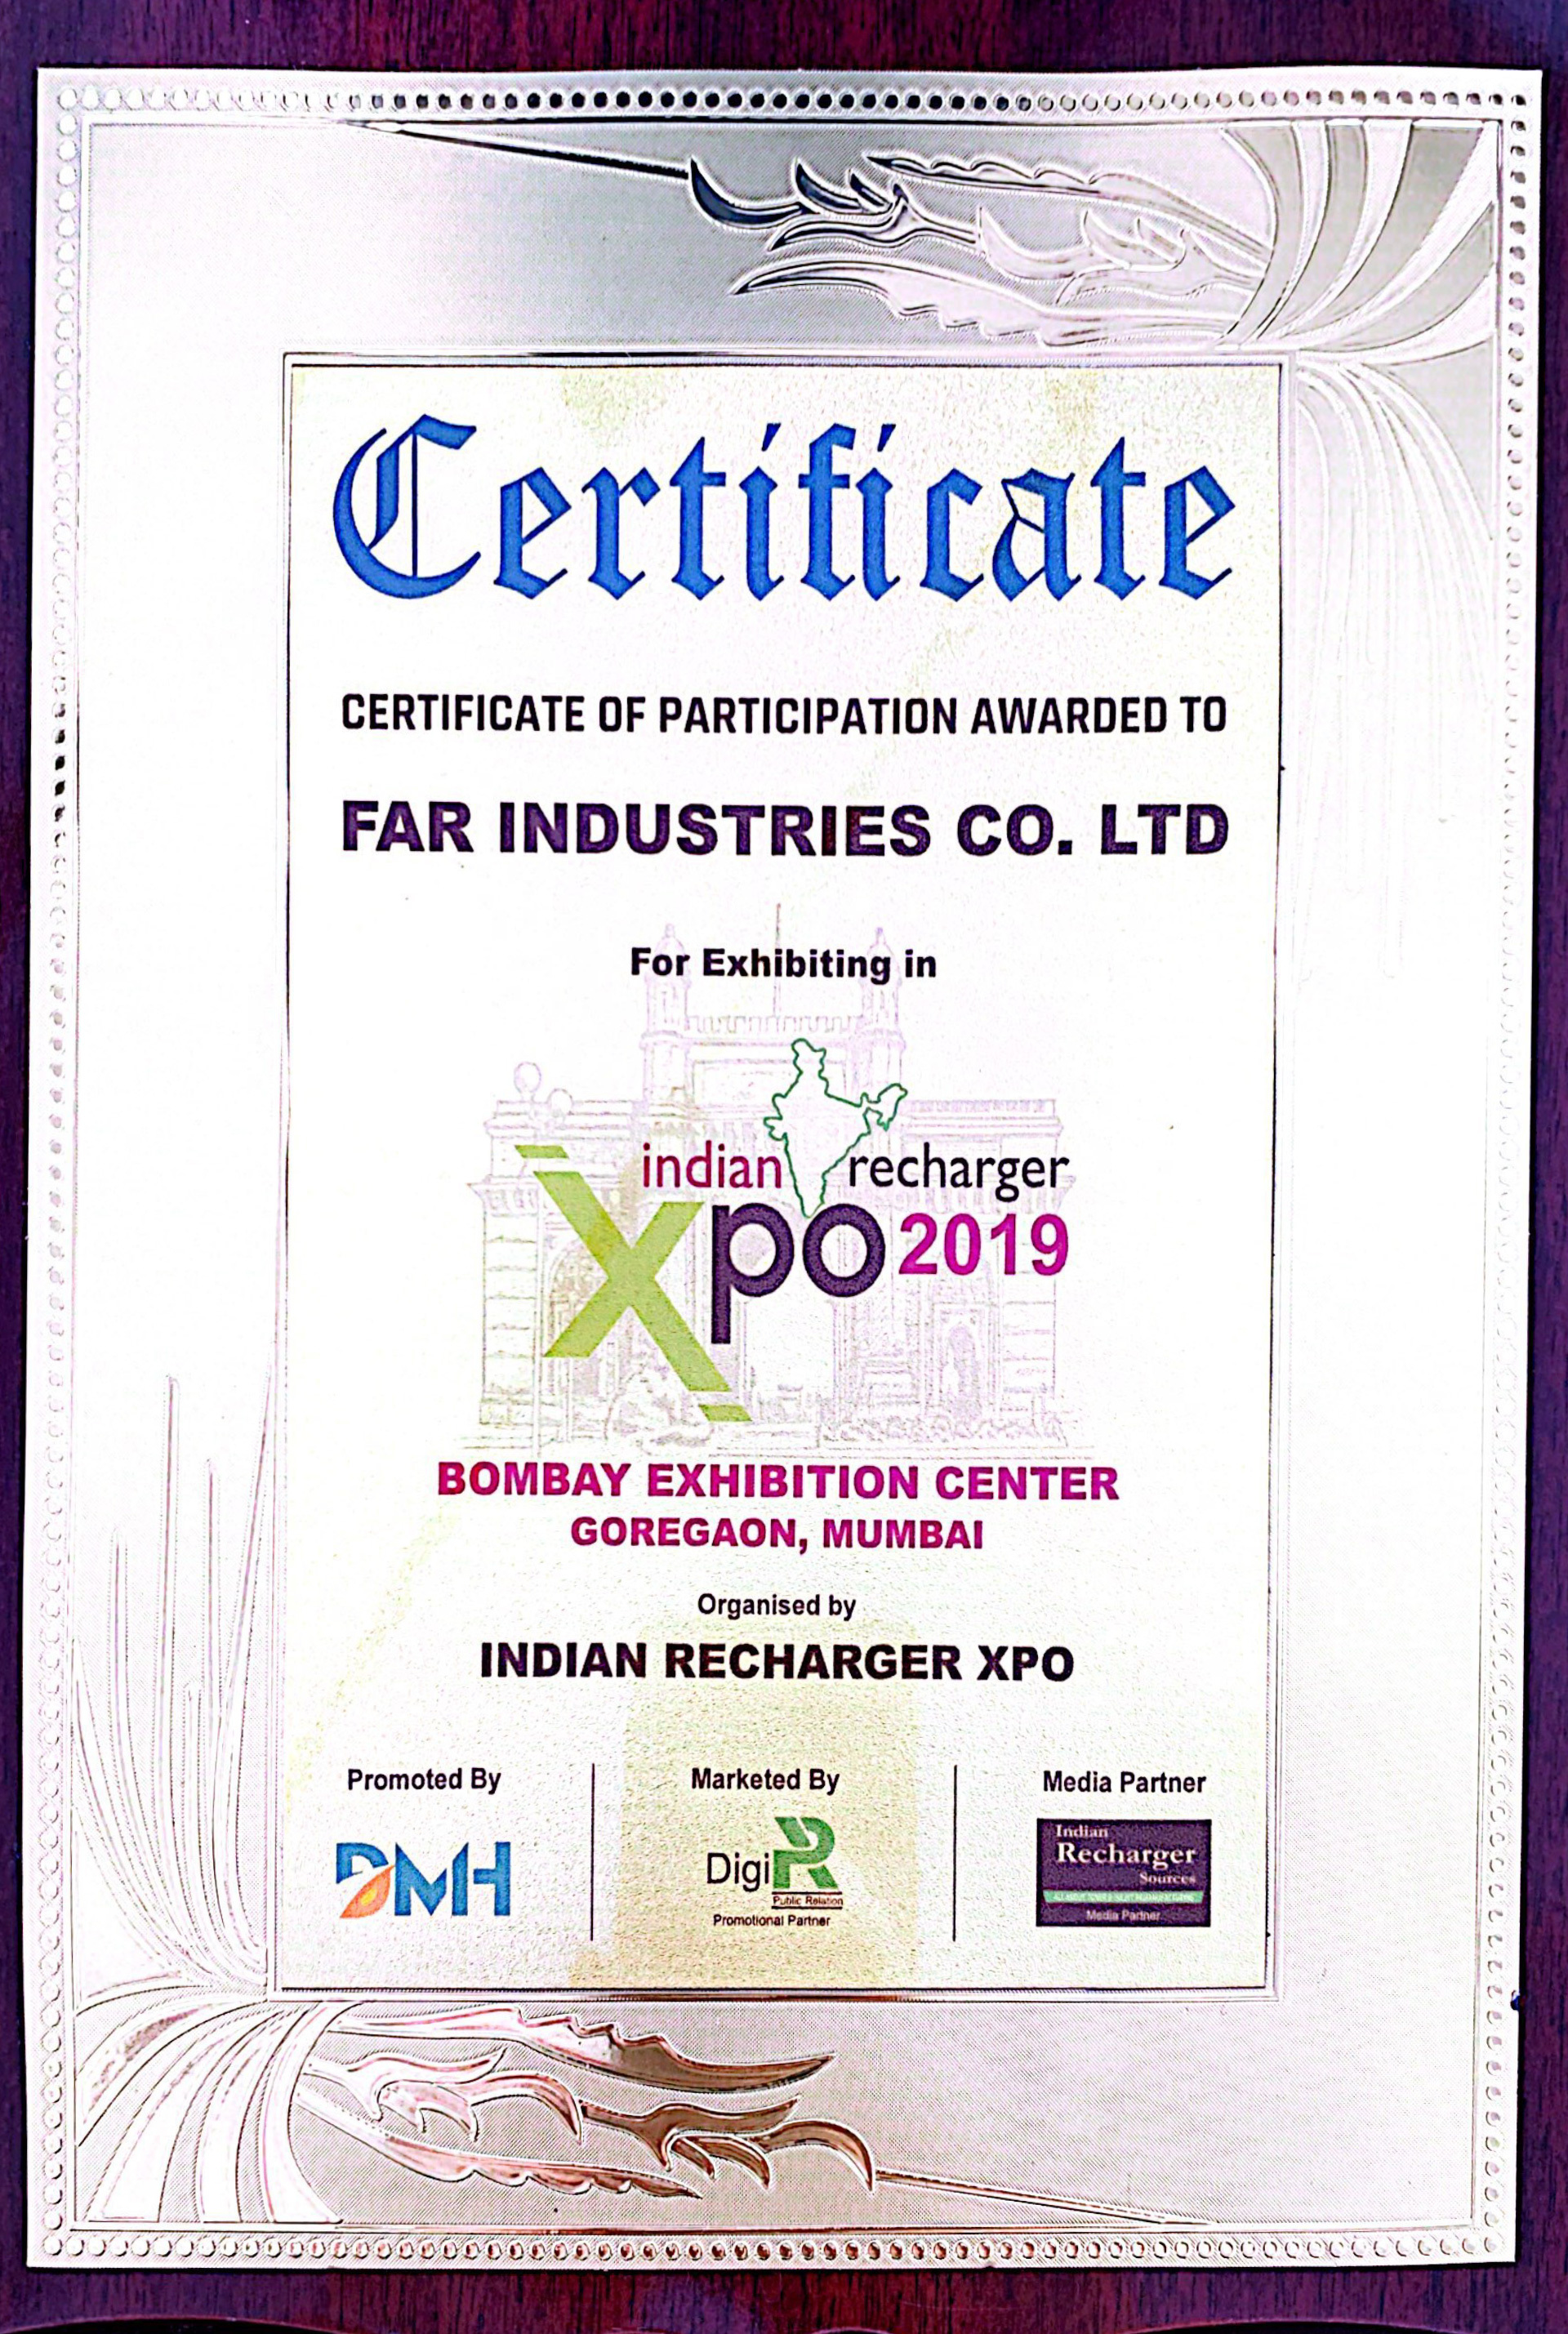 CERTIFICATE OF INDIAN RECHARGER XPO